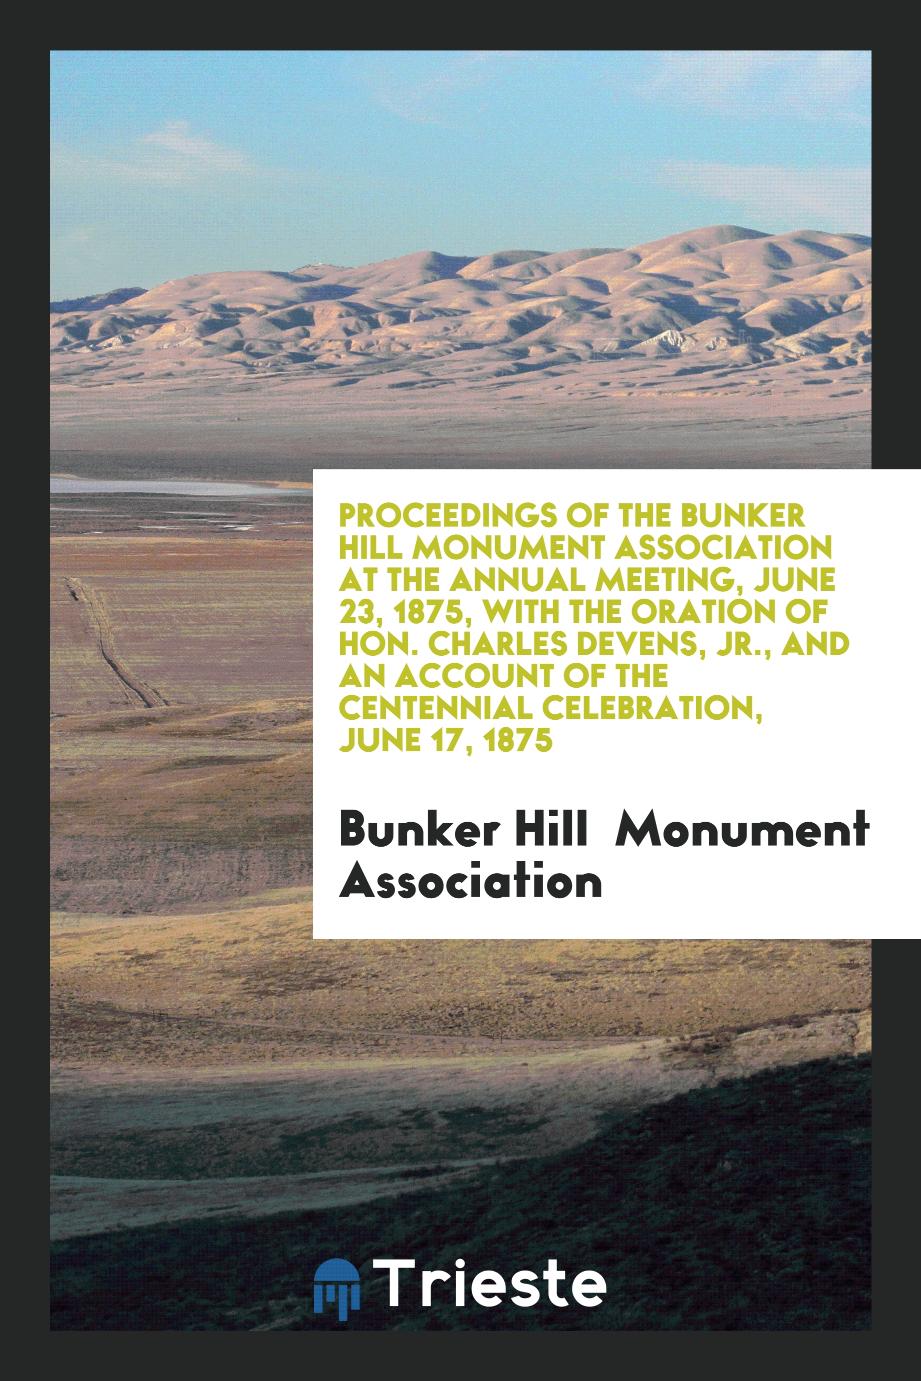 Proceedings of the Bunker Hill Monument Association at the Annual Meeting, June 23, 1875, with the Oration of Hon. Charles Devens, Jr., and an Account of the Centennial Celebration, June 17, 1875